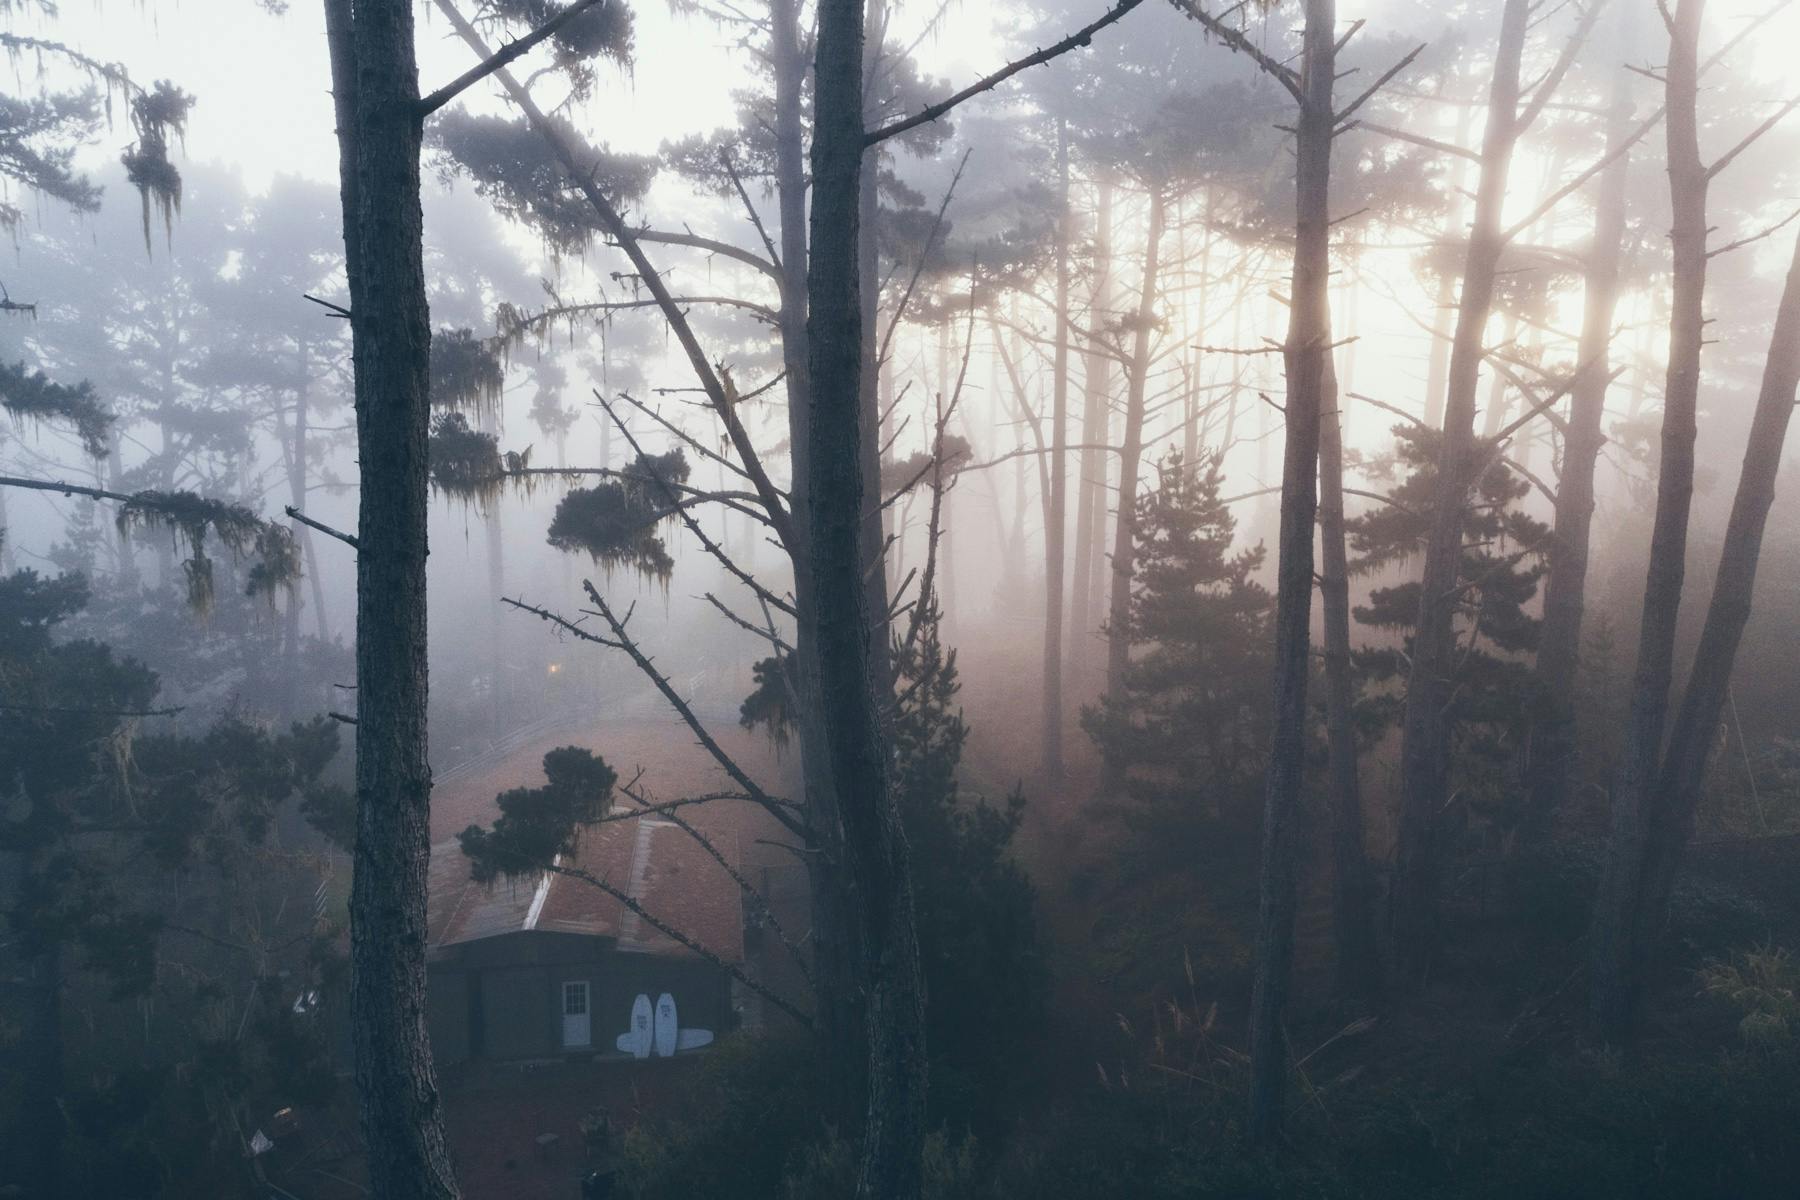 Elevated view of a surfboard shaping room in a foggy forest landscape captured by Ryan "Chachi" Craig